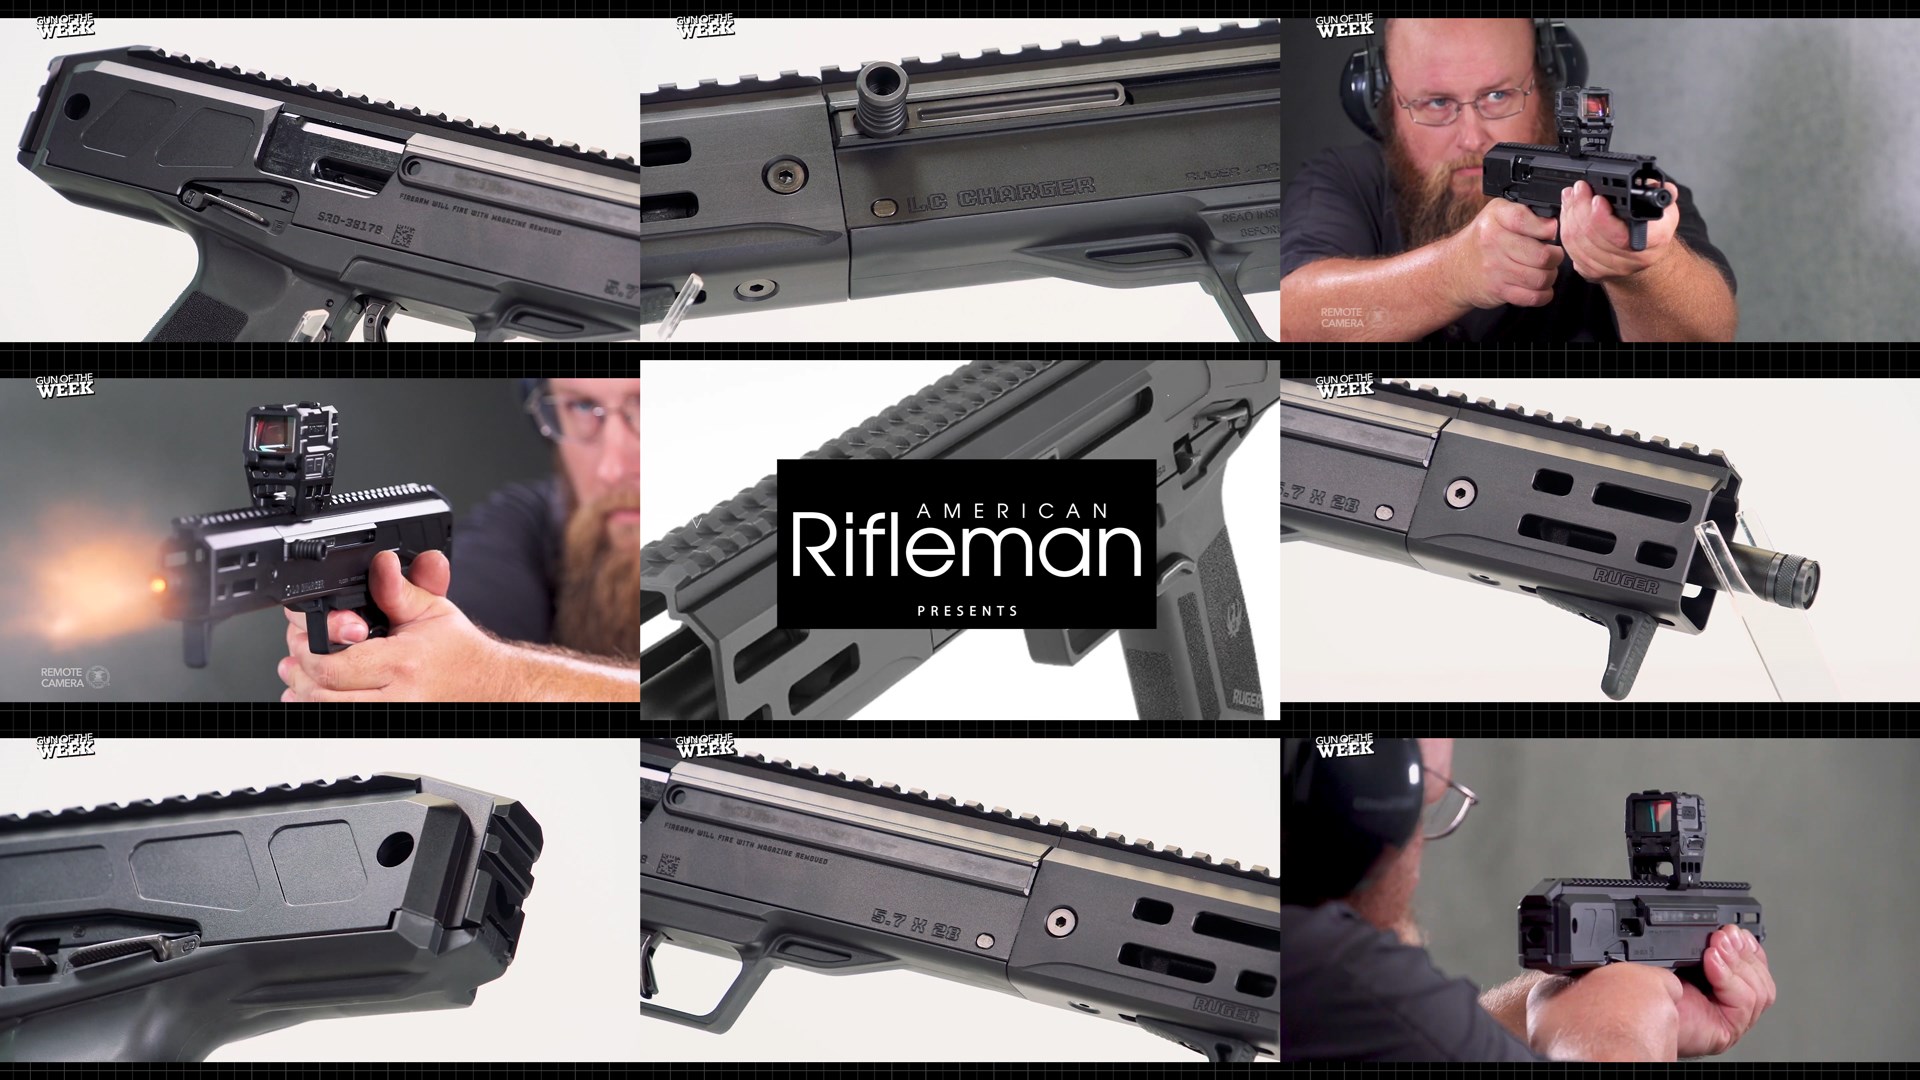 TEXT ON IMAGE "AMERICAN RIFLEMAN PRESENTS" shown with man shooting Ruger LC Charger pistol 9 images arrangement tiles mosaic